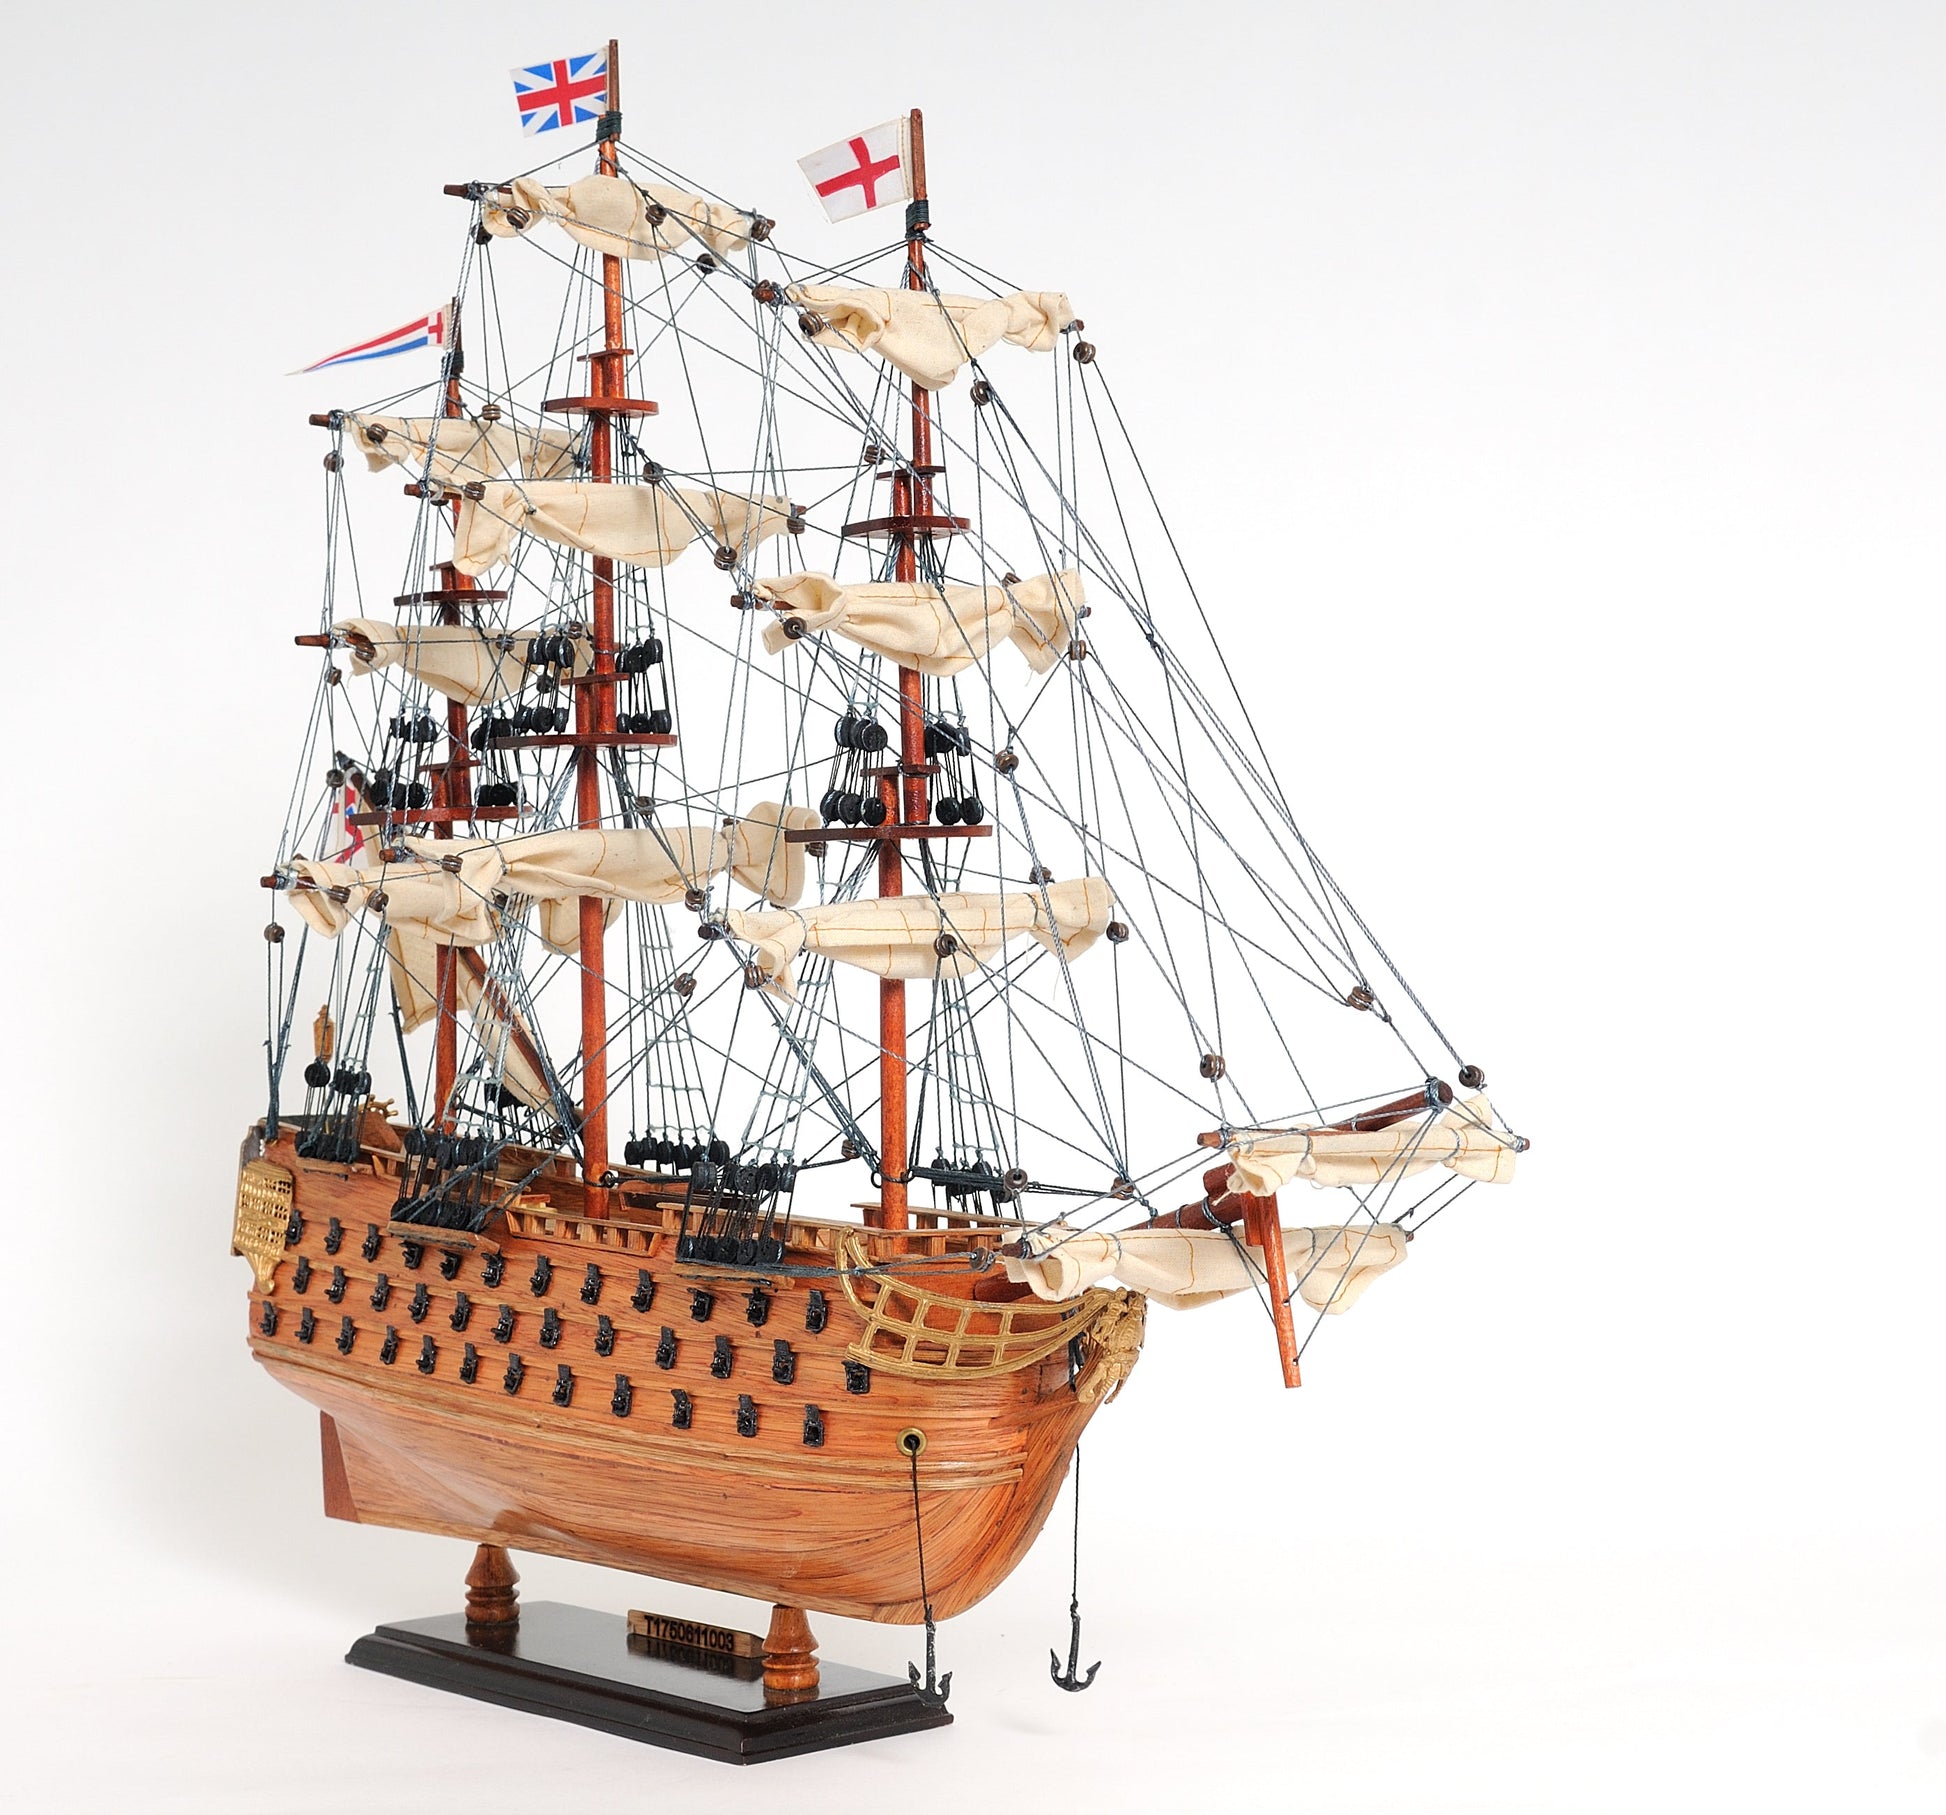 Aldo Hobbies & Creative Arts> Collectibles> Scale Model new / Wood / L: 19.5 W: 7 H: 18 Inches HMS Victory Small Tallship Wood Model Sailboat Assembled